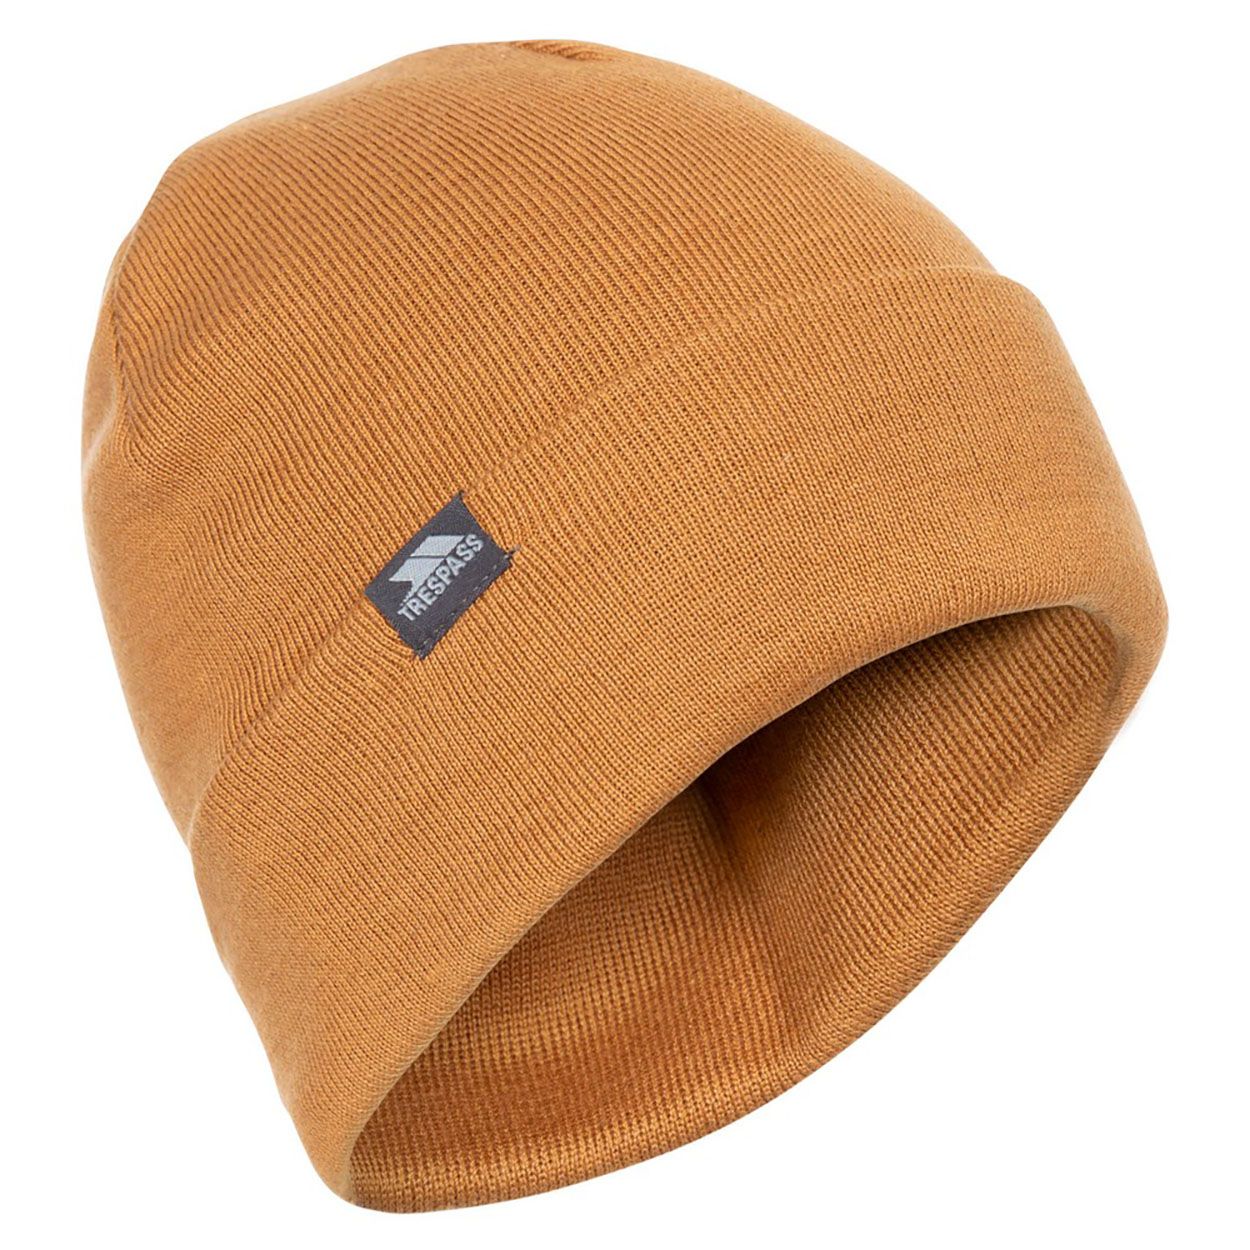 Outer: 50% Acrylic, 50% Cotton.  Knitted hat. Dual style. Beanie or slouch option. Woven label.